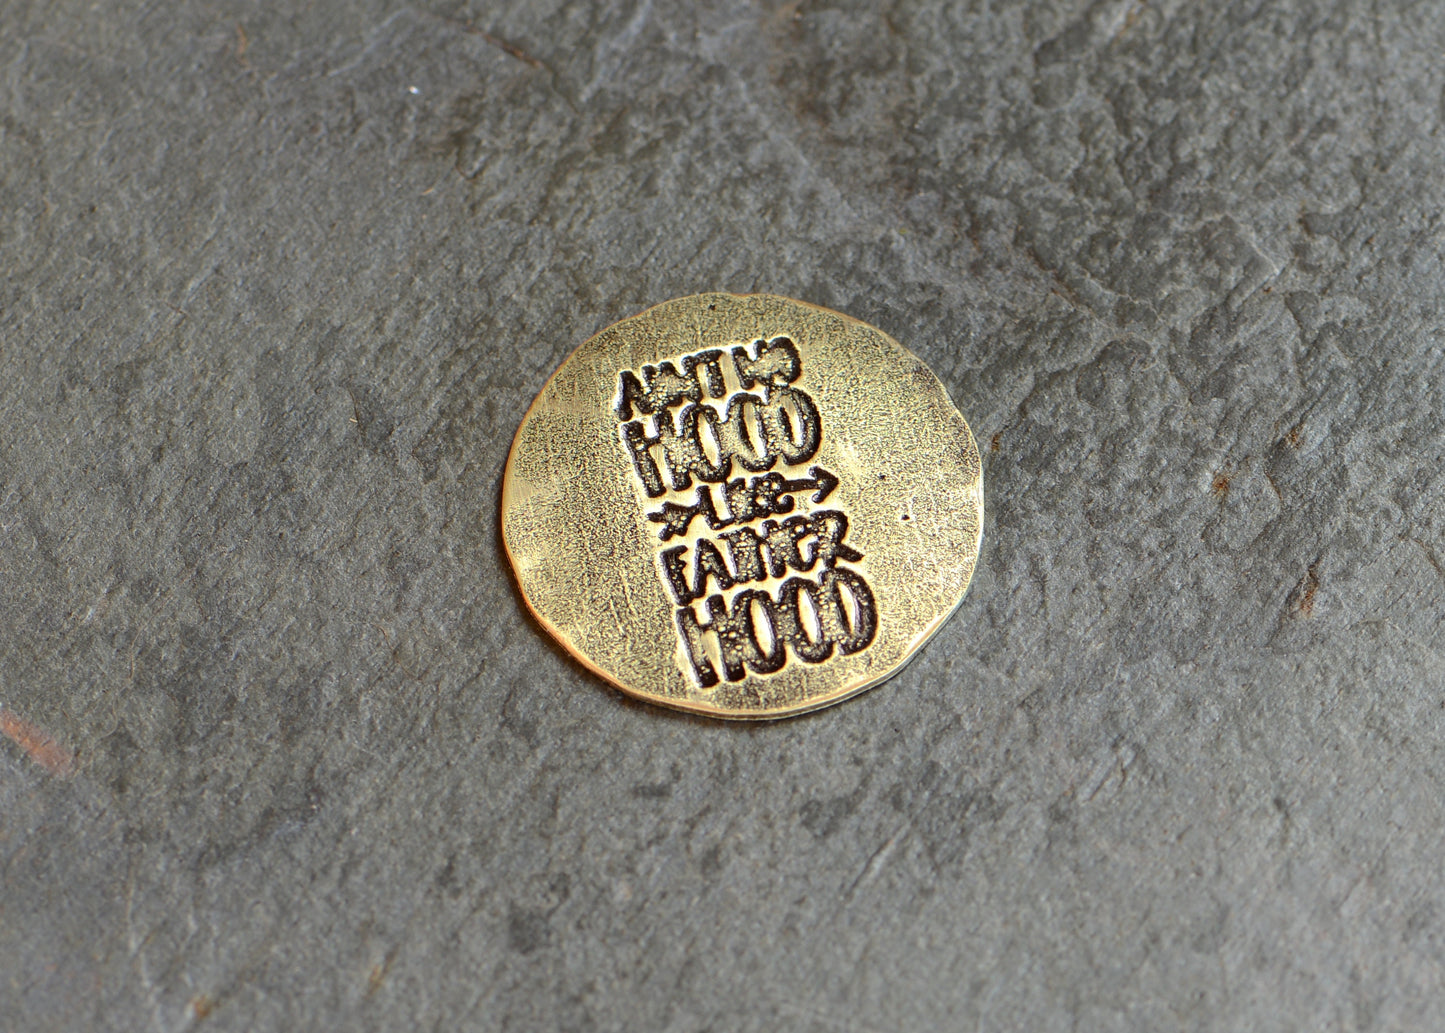 Golf ball marker stamped with " Ain't no hood like fatherhood" in brass